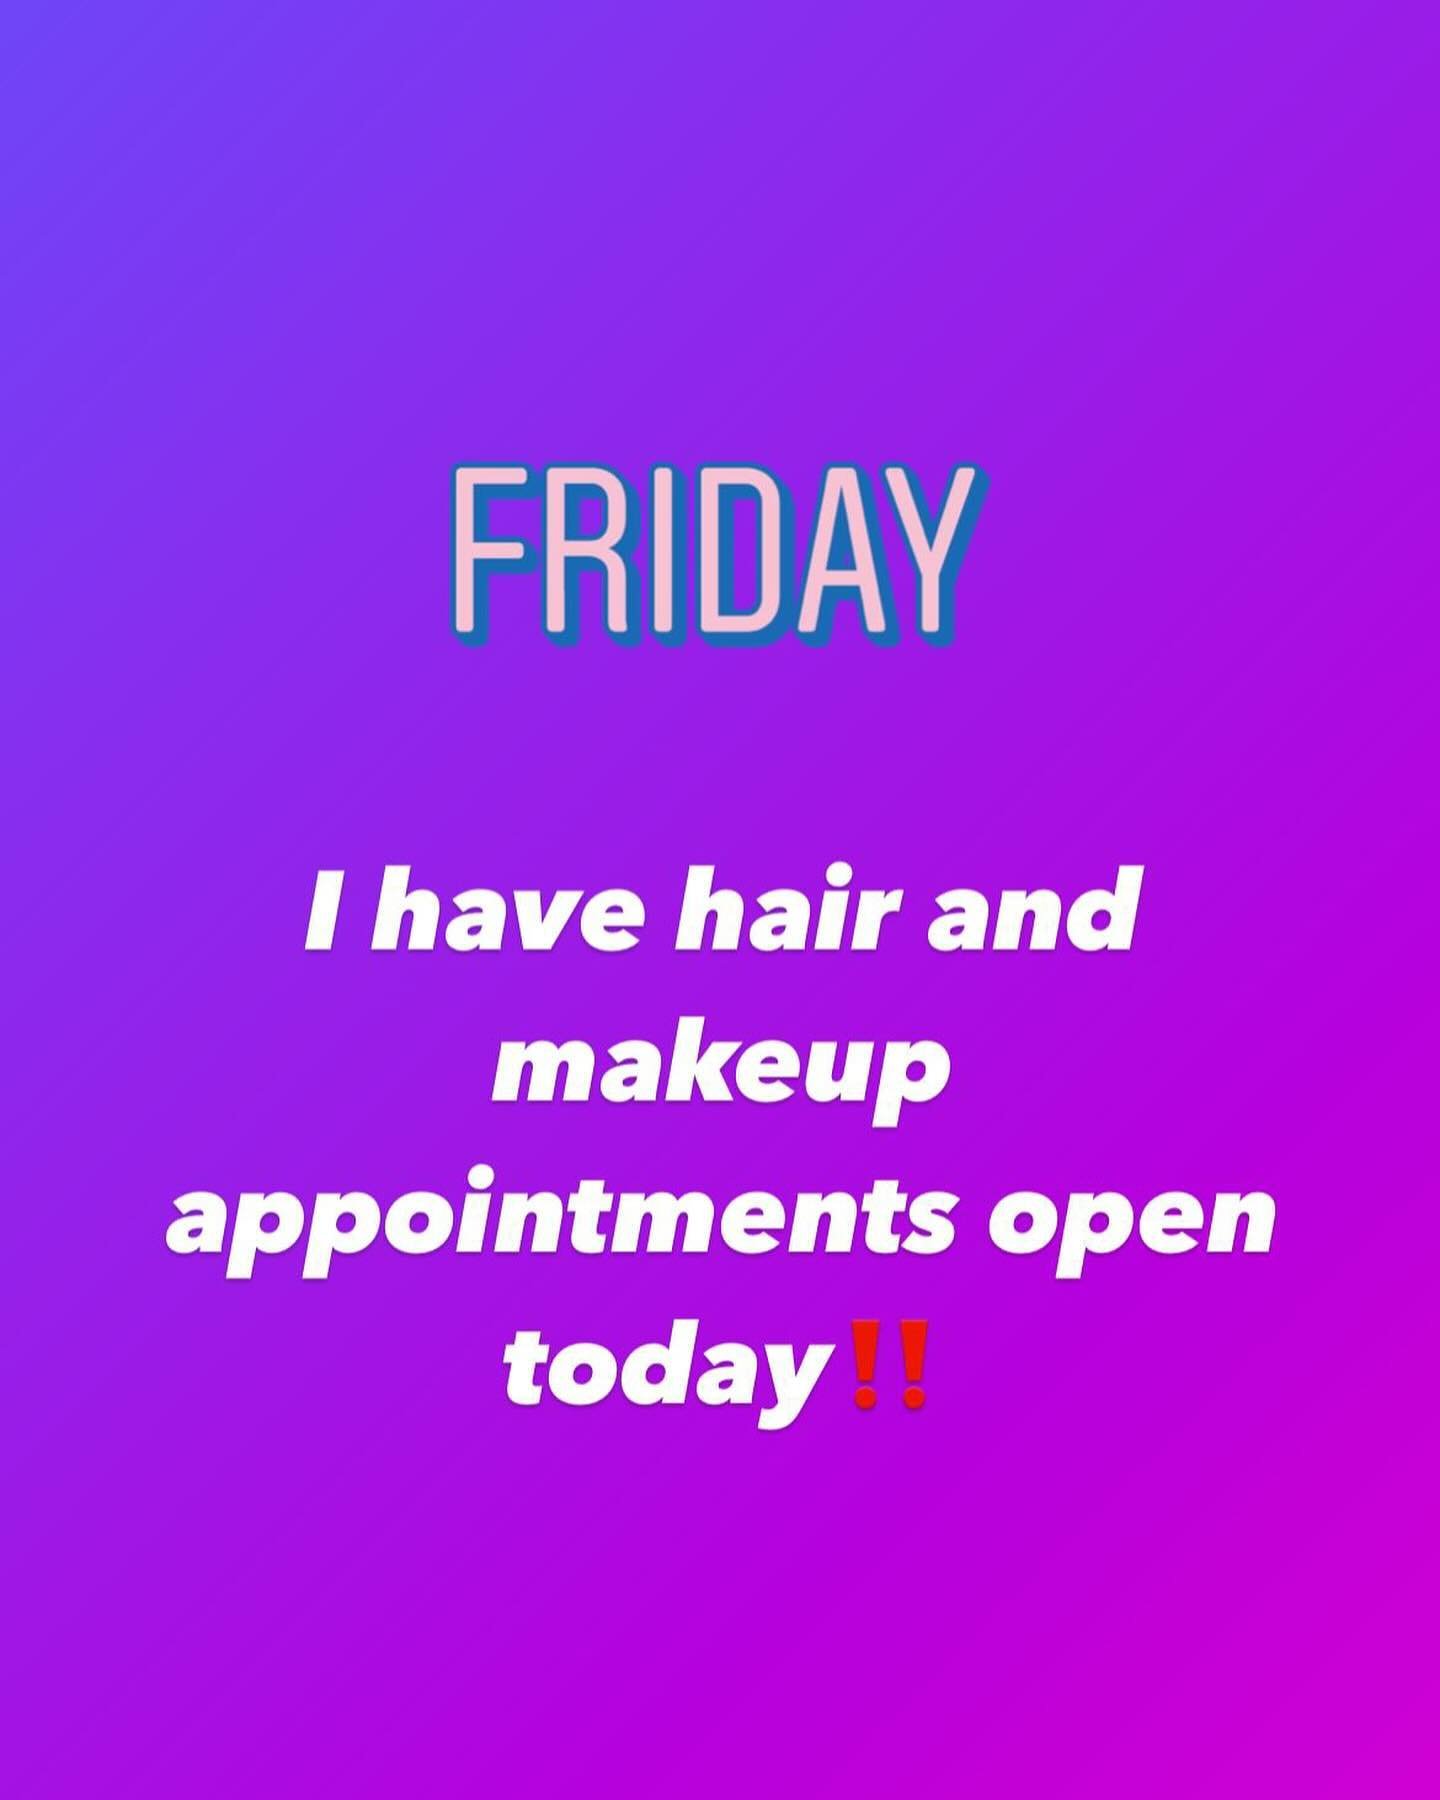 Hit the Dm for an appointment ‼️